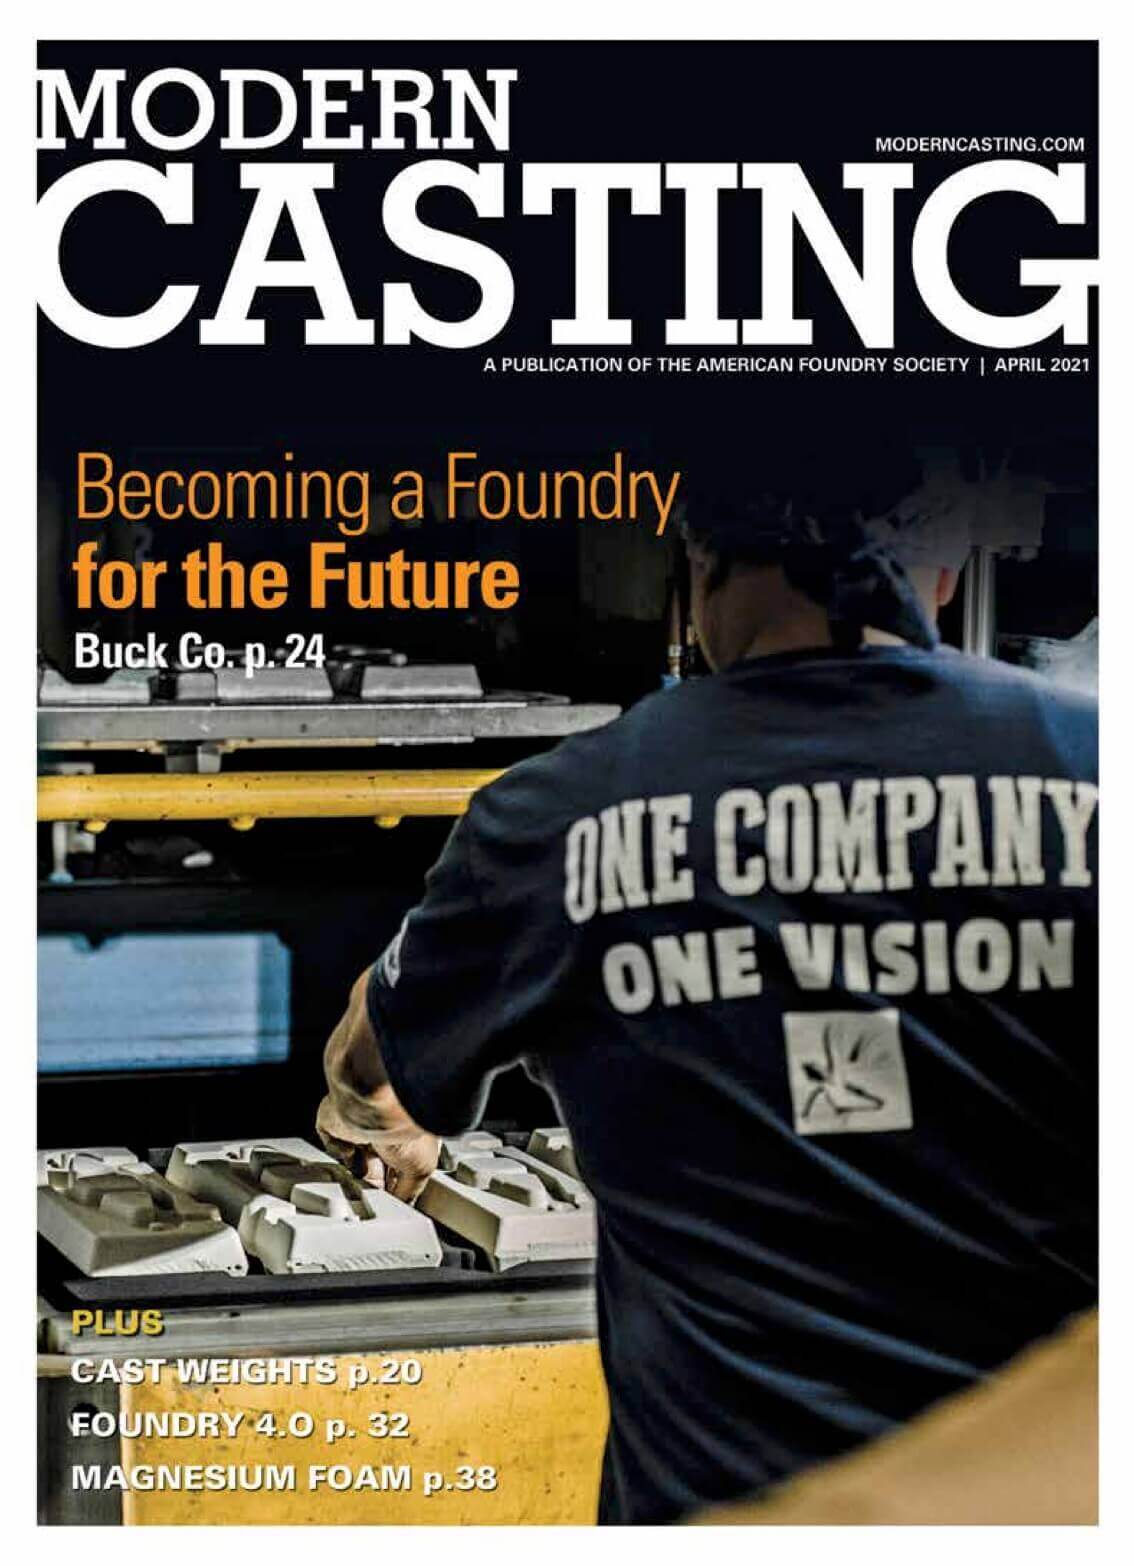 Meet the Foundry of the Future according to Modern Casting Magazine